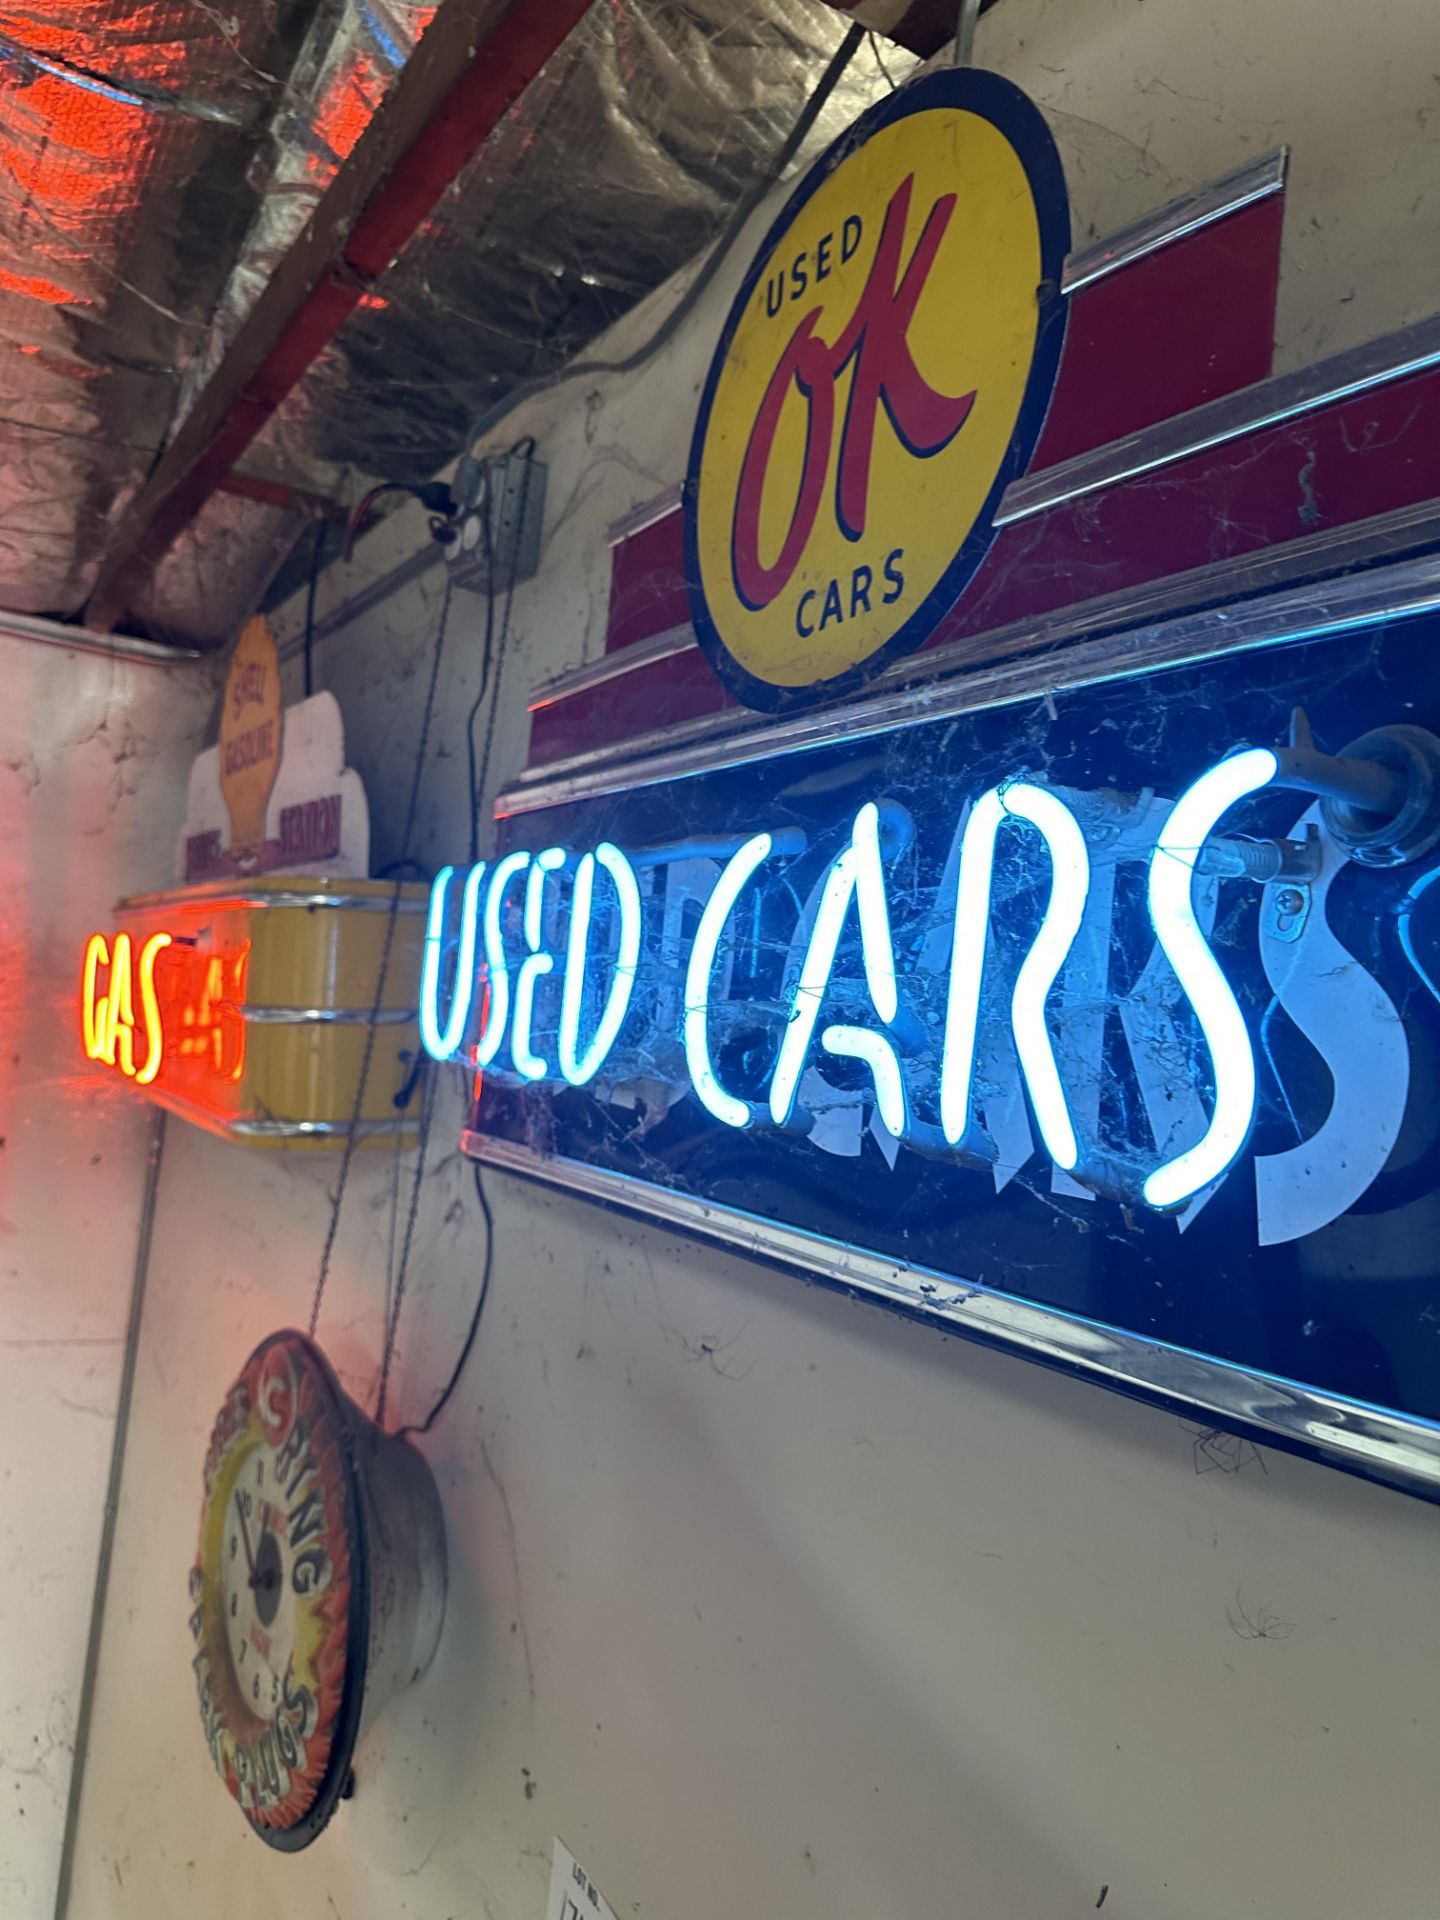 Hamms, shell gas, ace clock used ok cars neon signs - Image 2 of 3